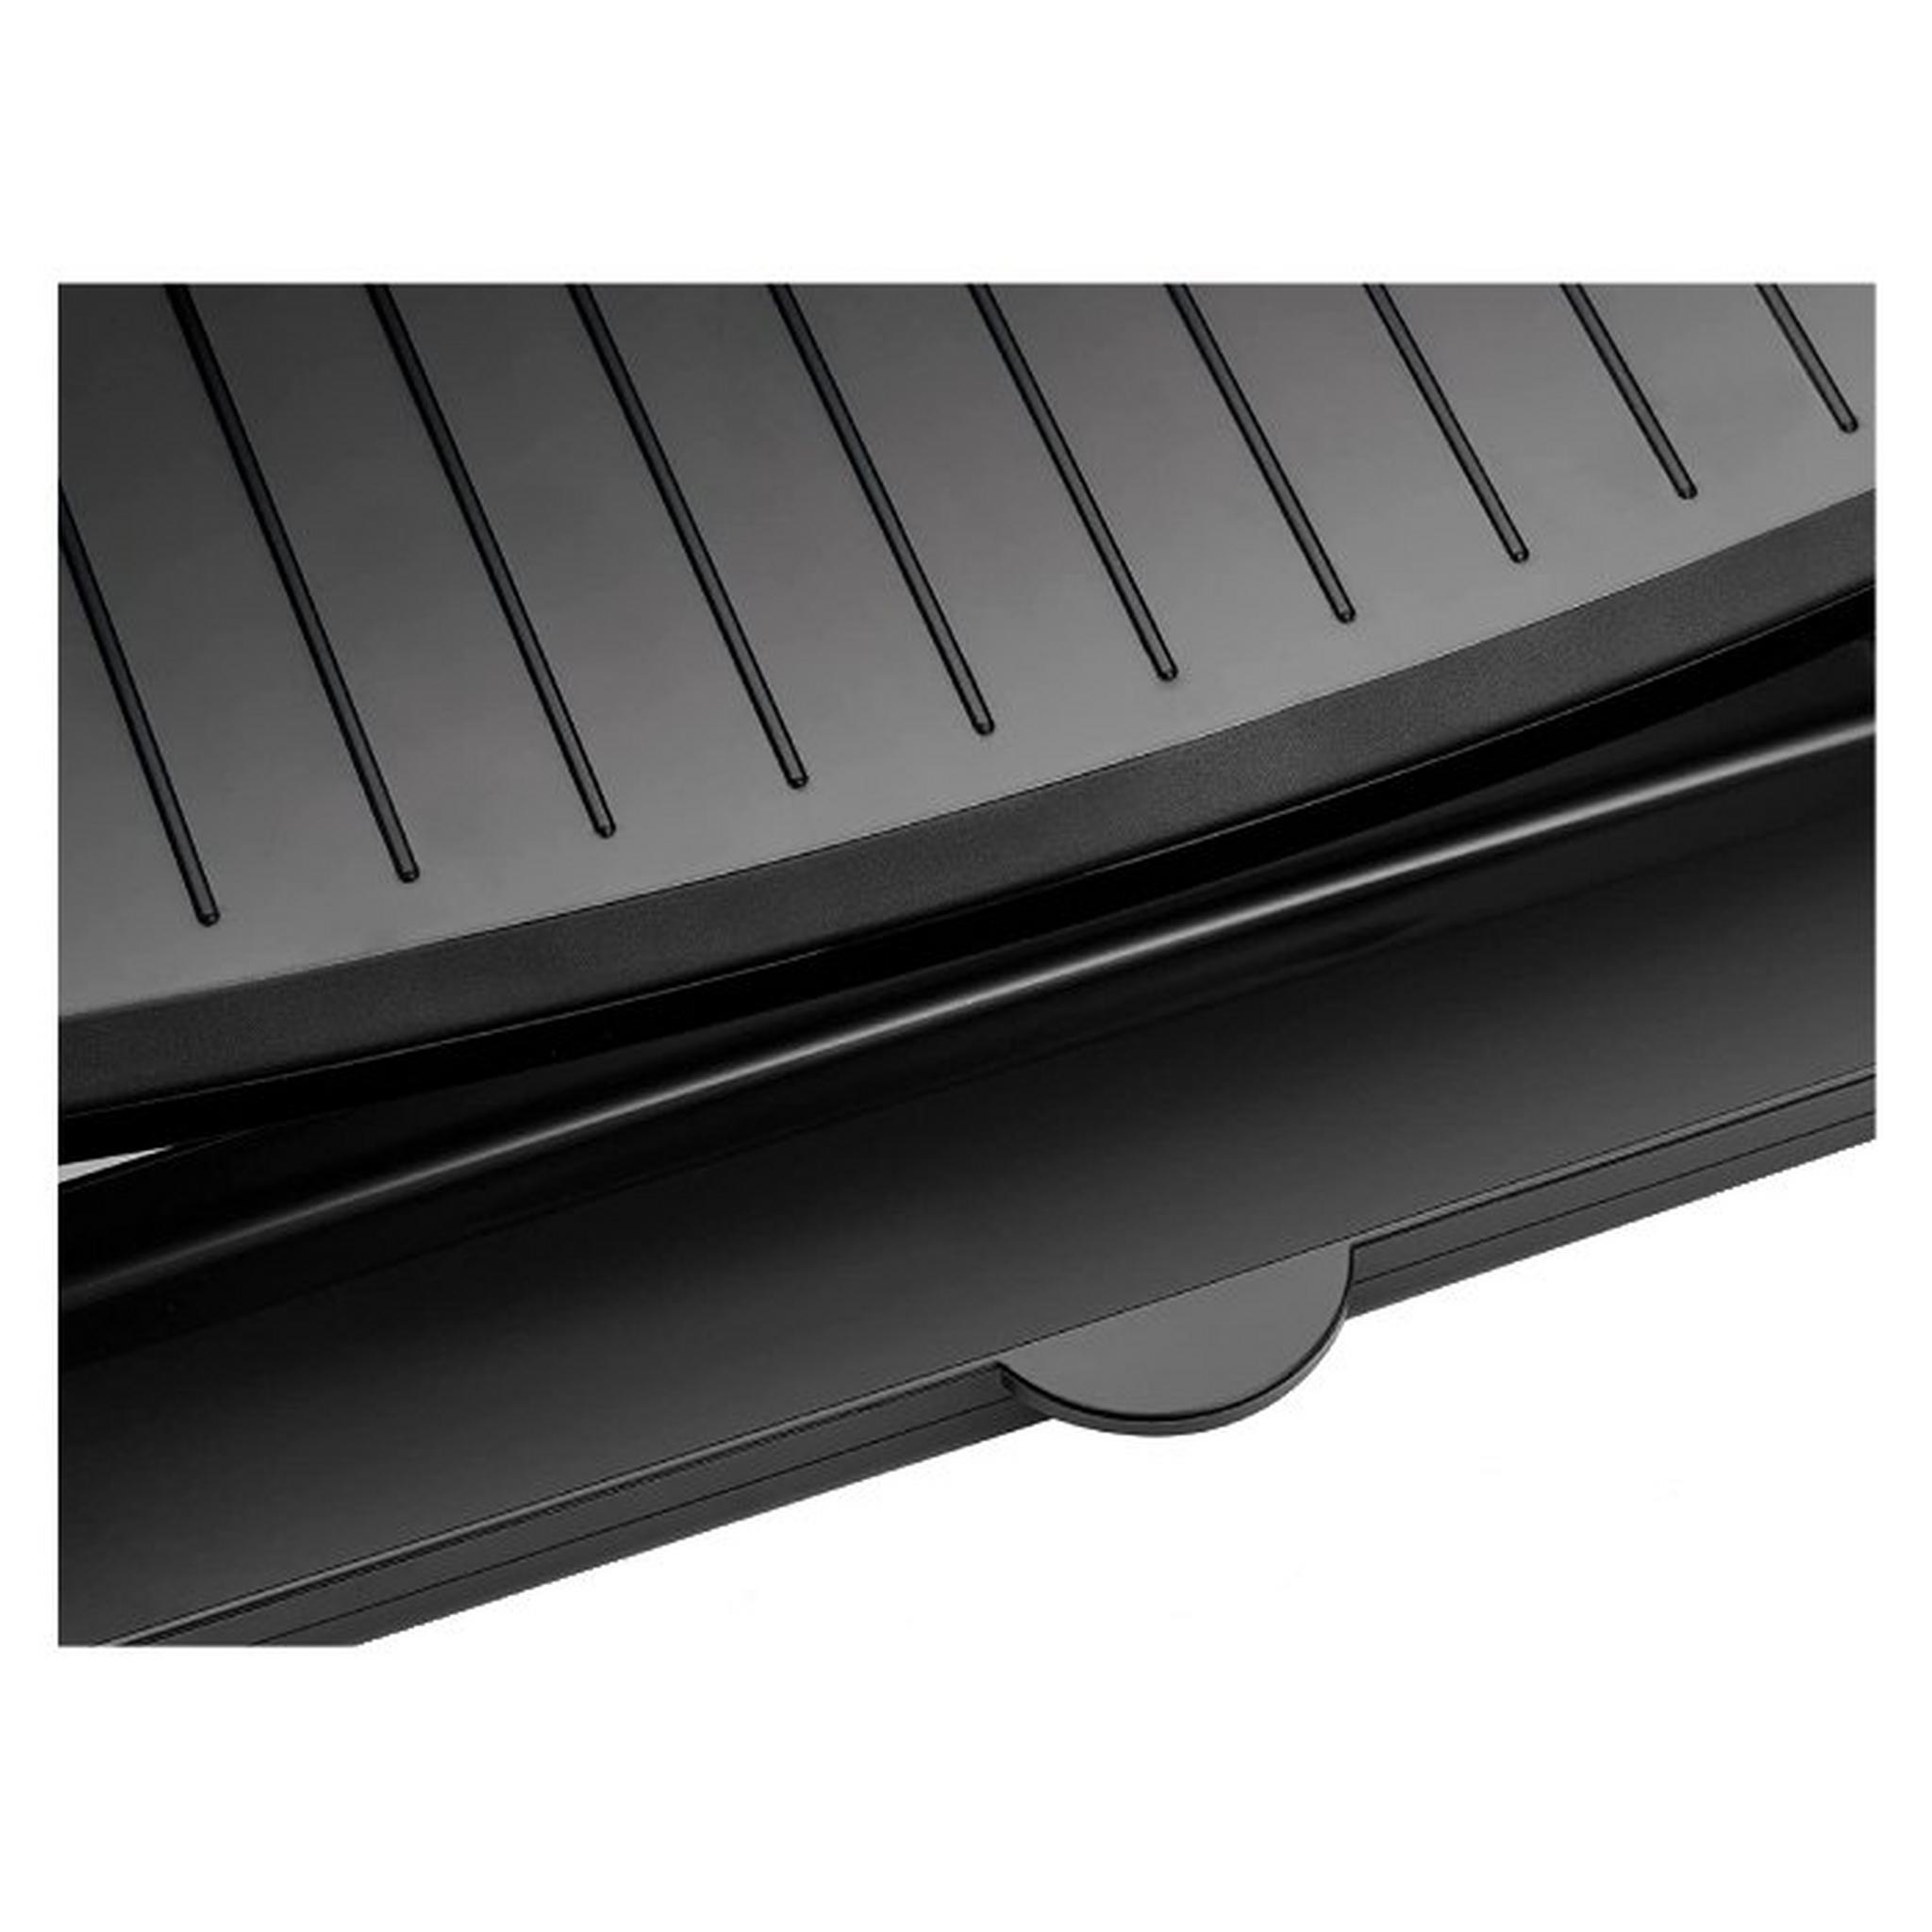 George Foreman Fit Grill 1370 - 1630W (25811-56) Copper